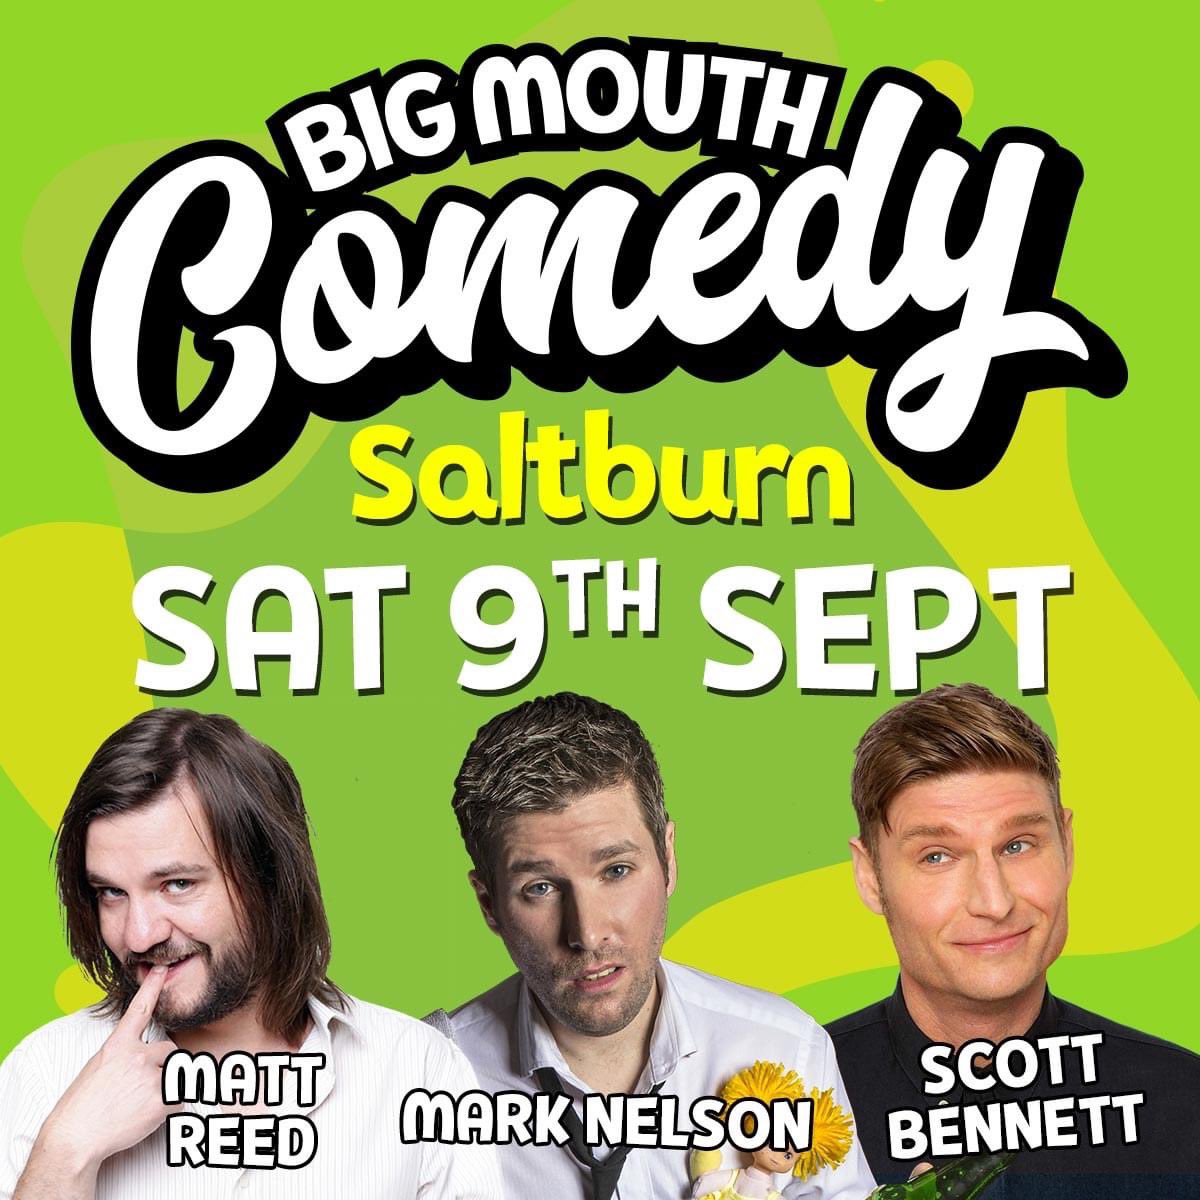 Only 25 tickets left for @SaltburnTheatre next Sat 9 September! Line up is MINT! @reed_mat @scottbcomedyuk @marknelsoncomic bigmouthcomedy.co.uk